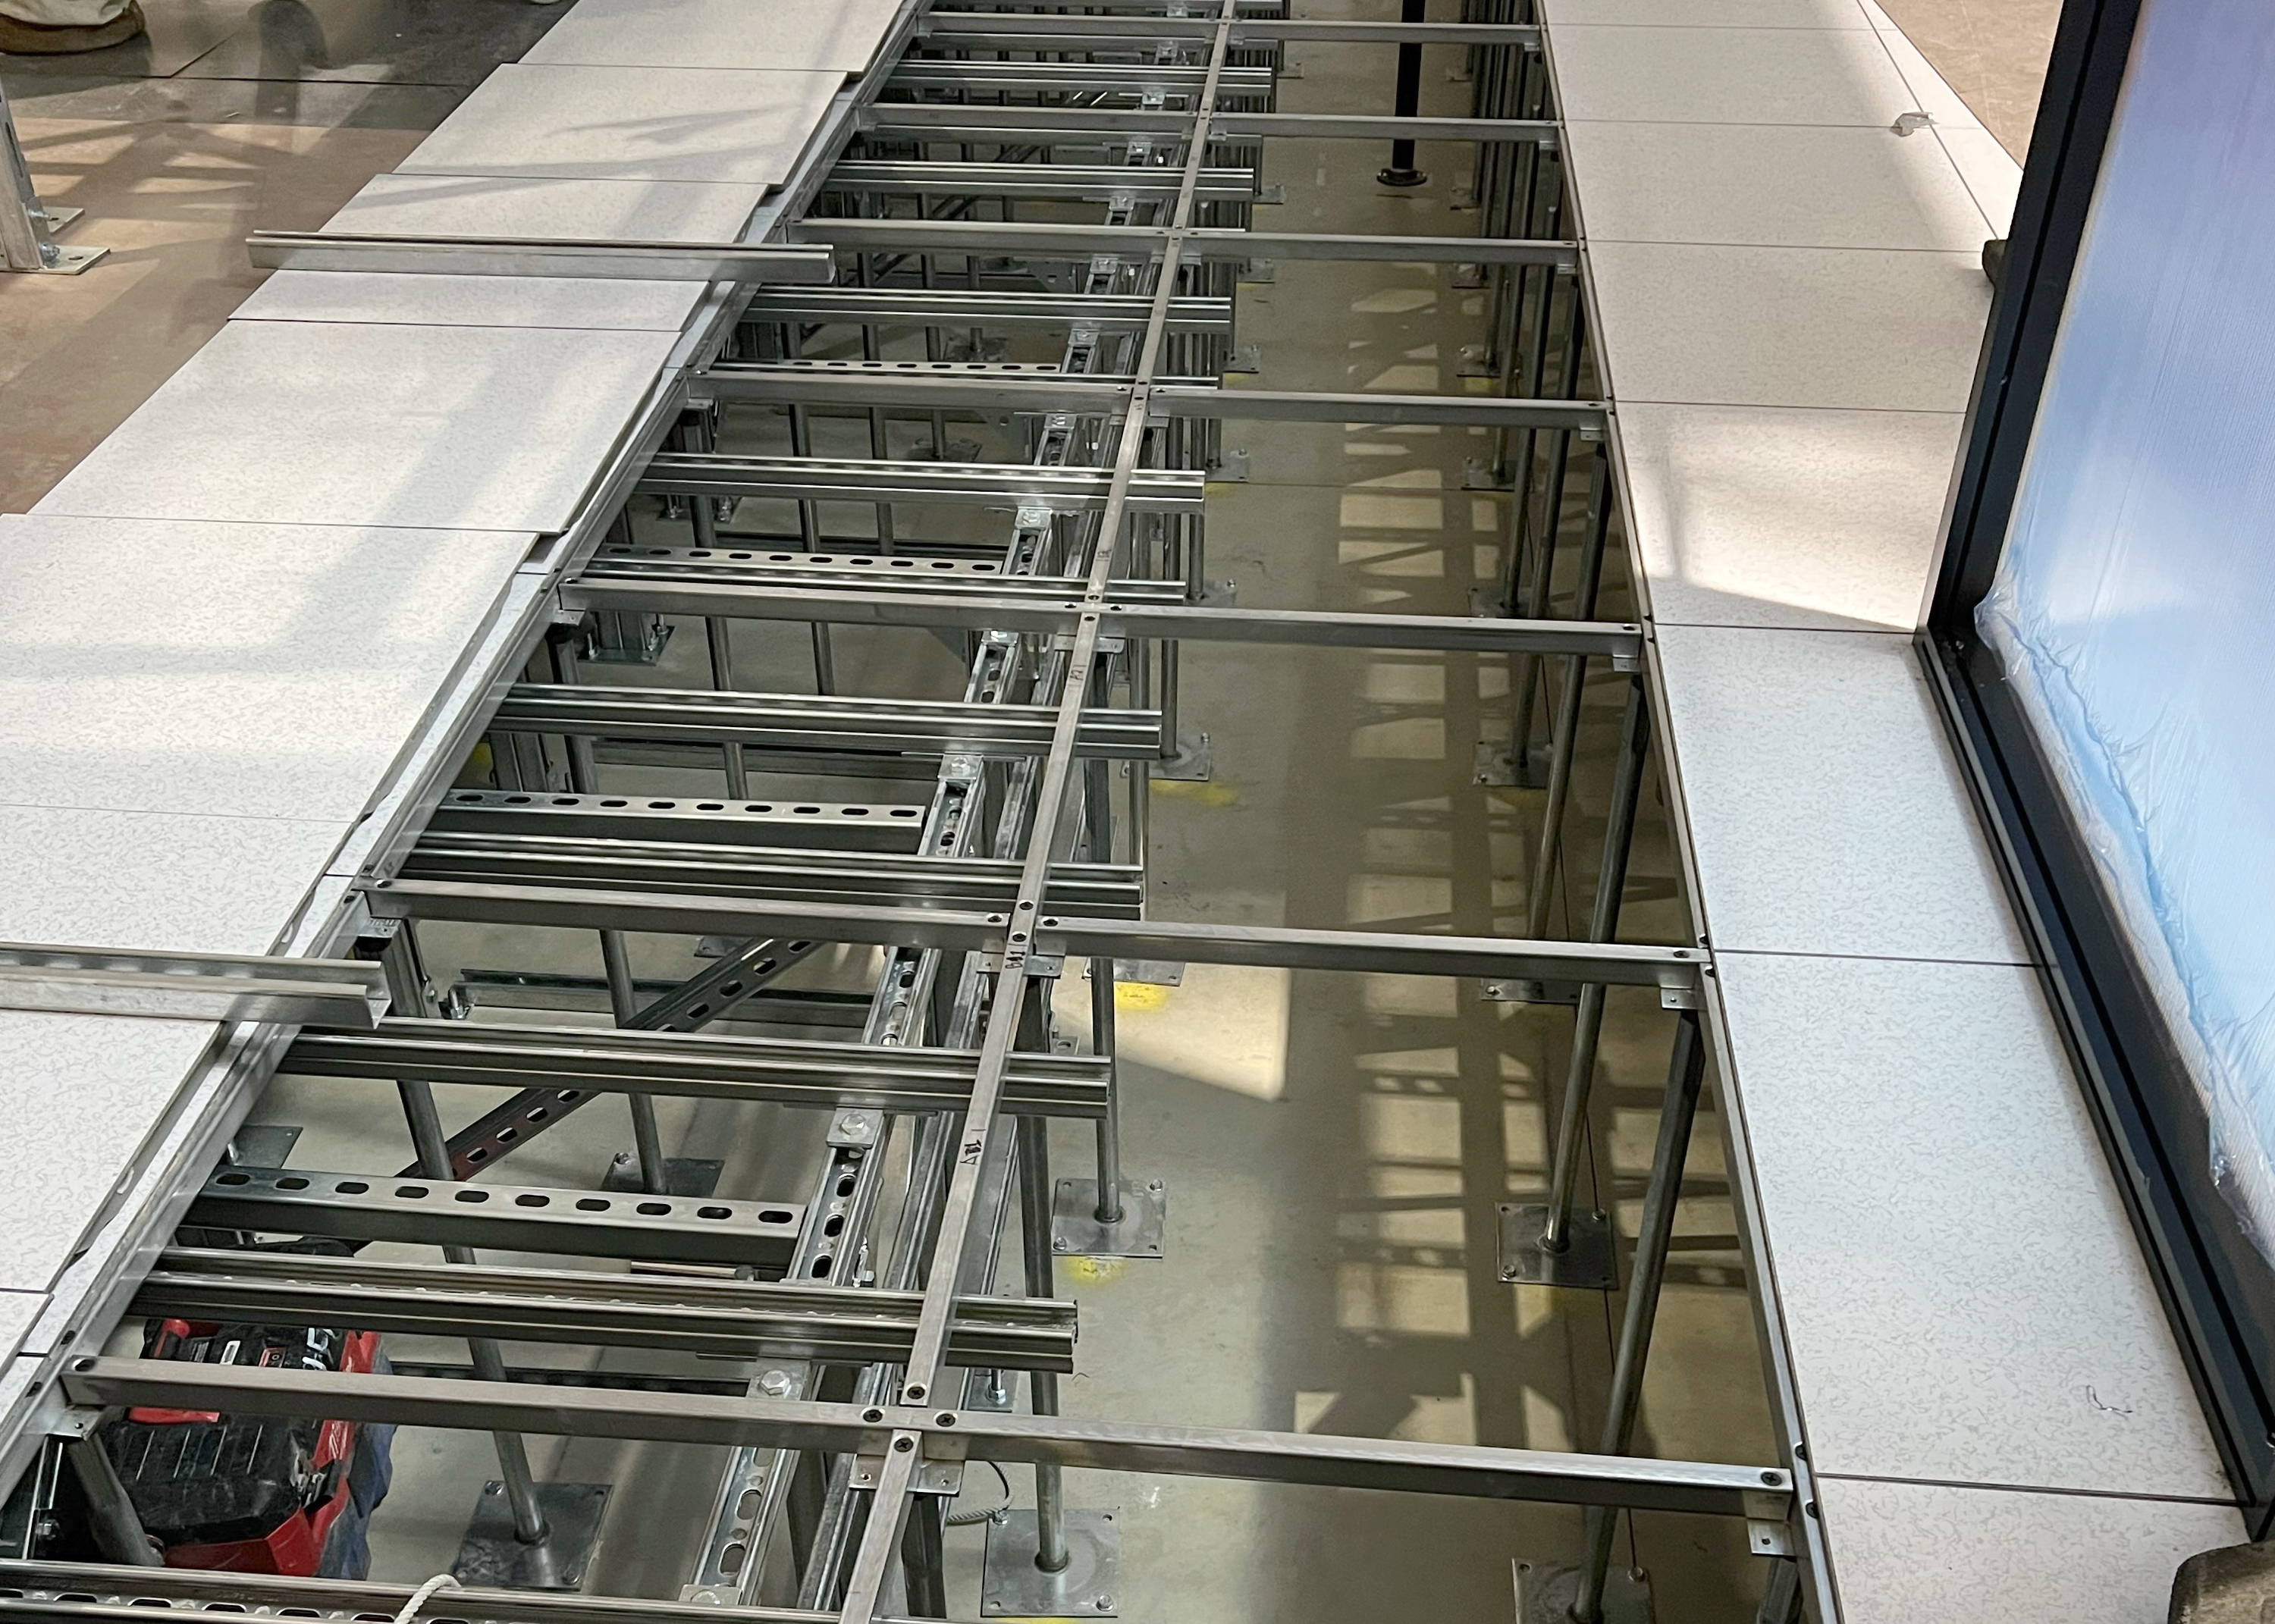 Tate Access Floor installation featuring Unistrut channel to support the heavier loads of a Data Center server(s).